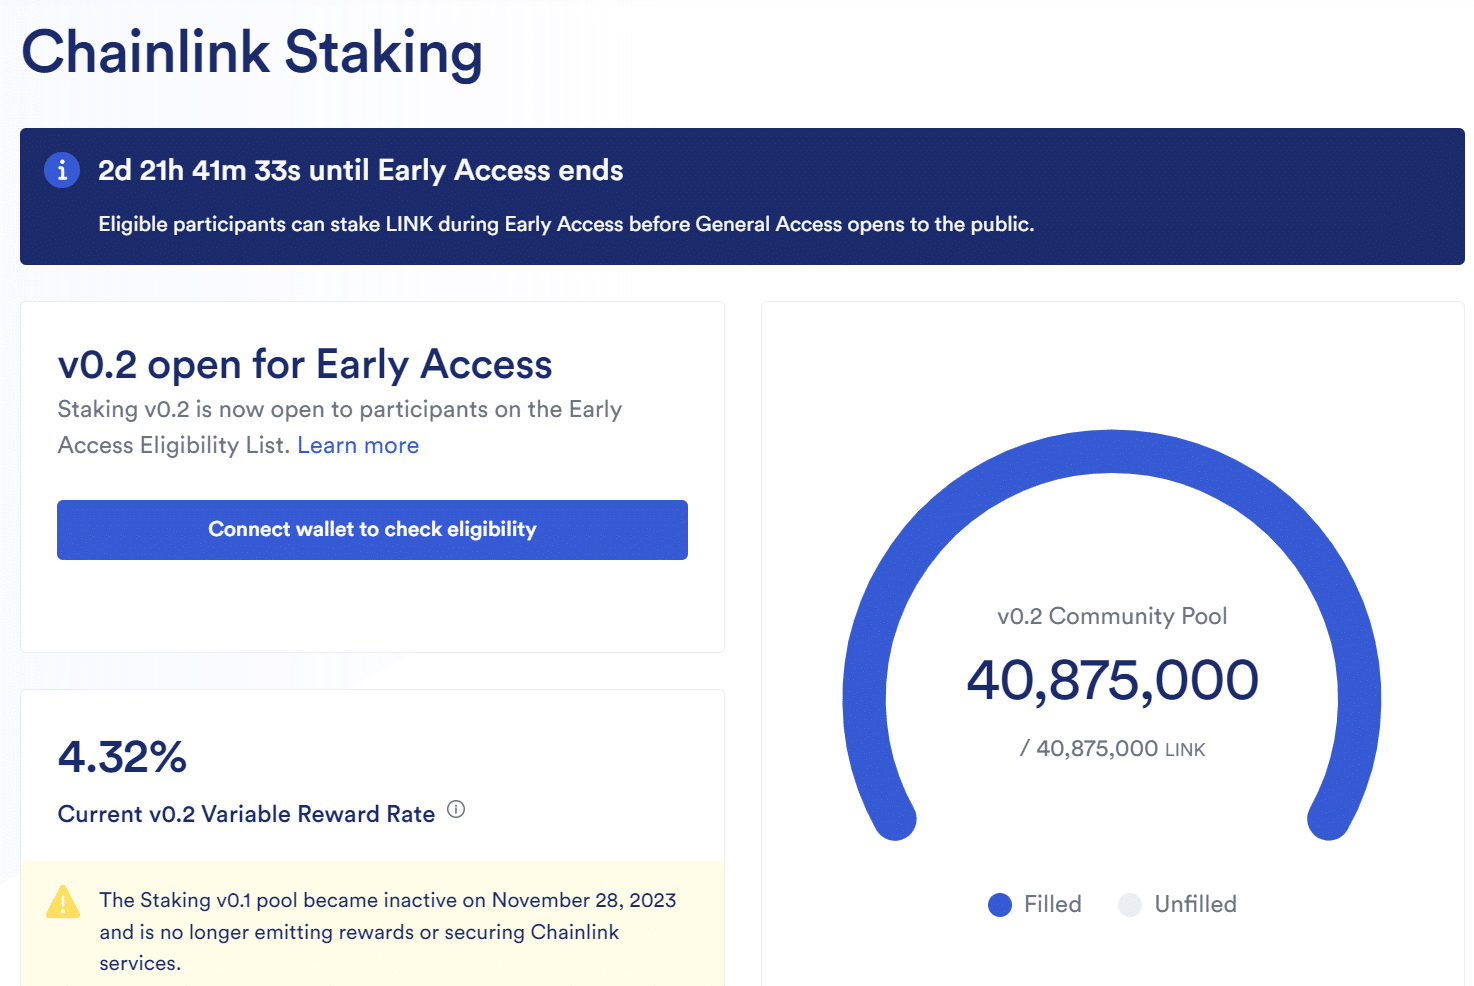 Chainlink's early access staking attracts $632m in LINK - 1